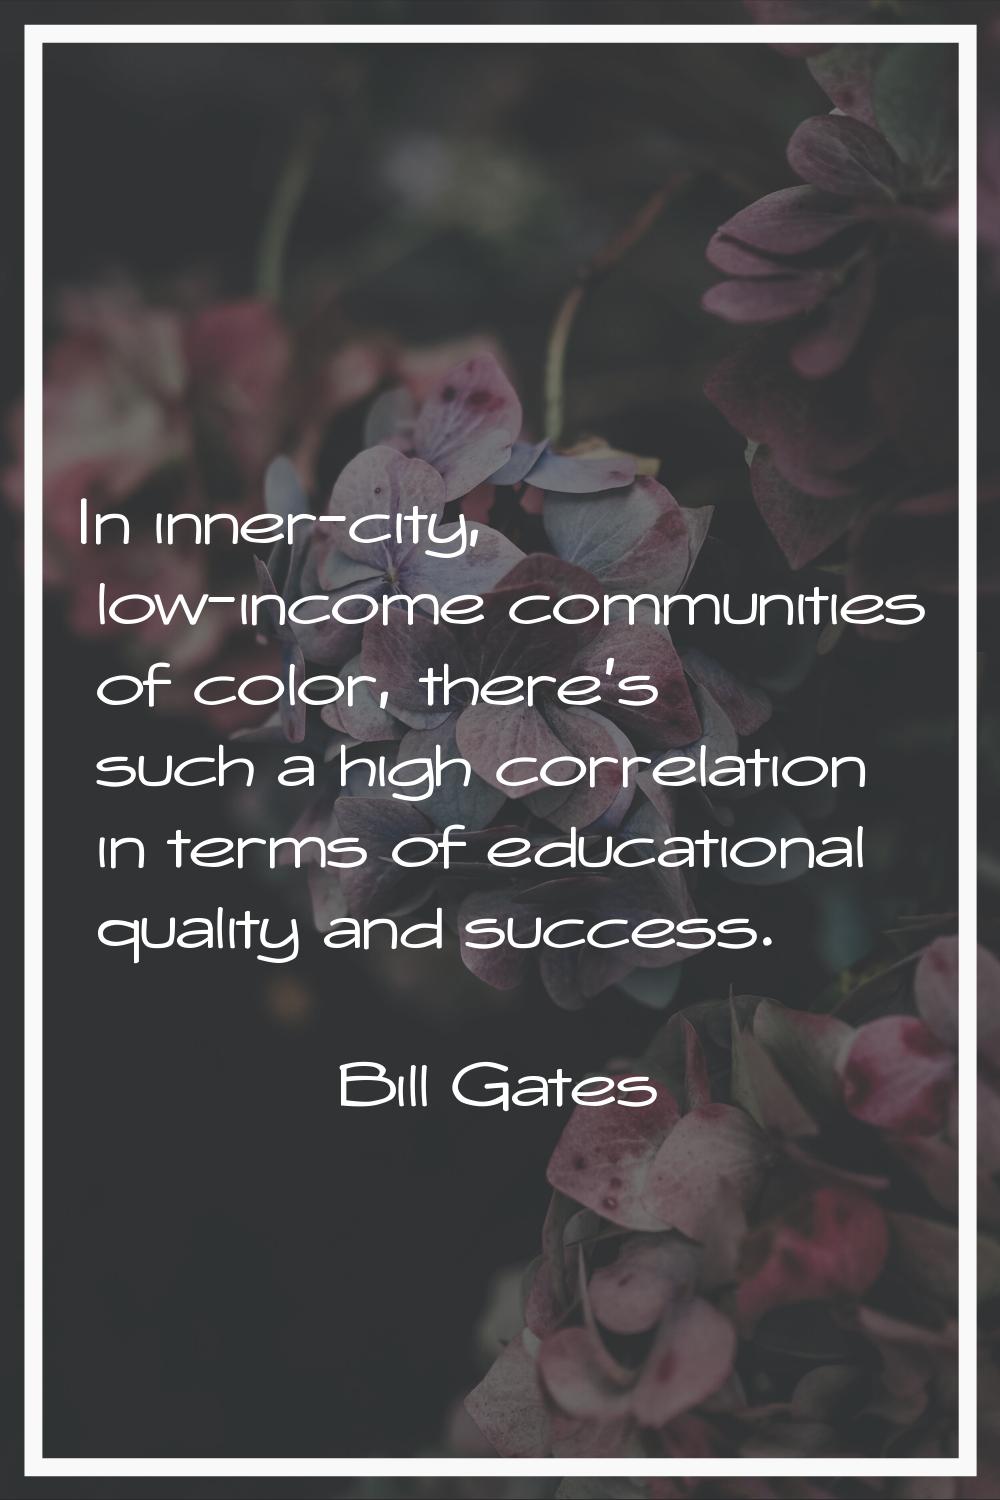 In inner-city, low-income communities of color, there's such a high correlation in terms of educati